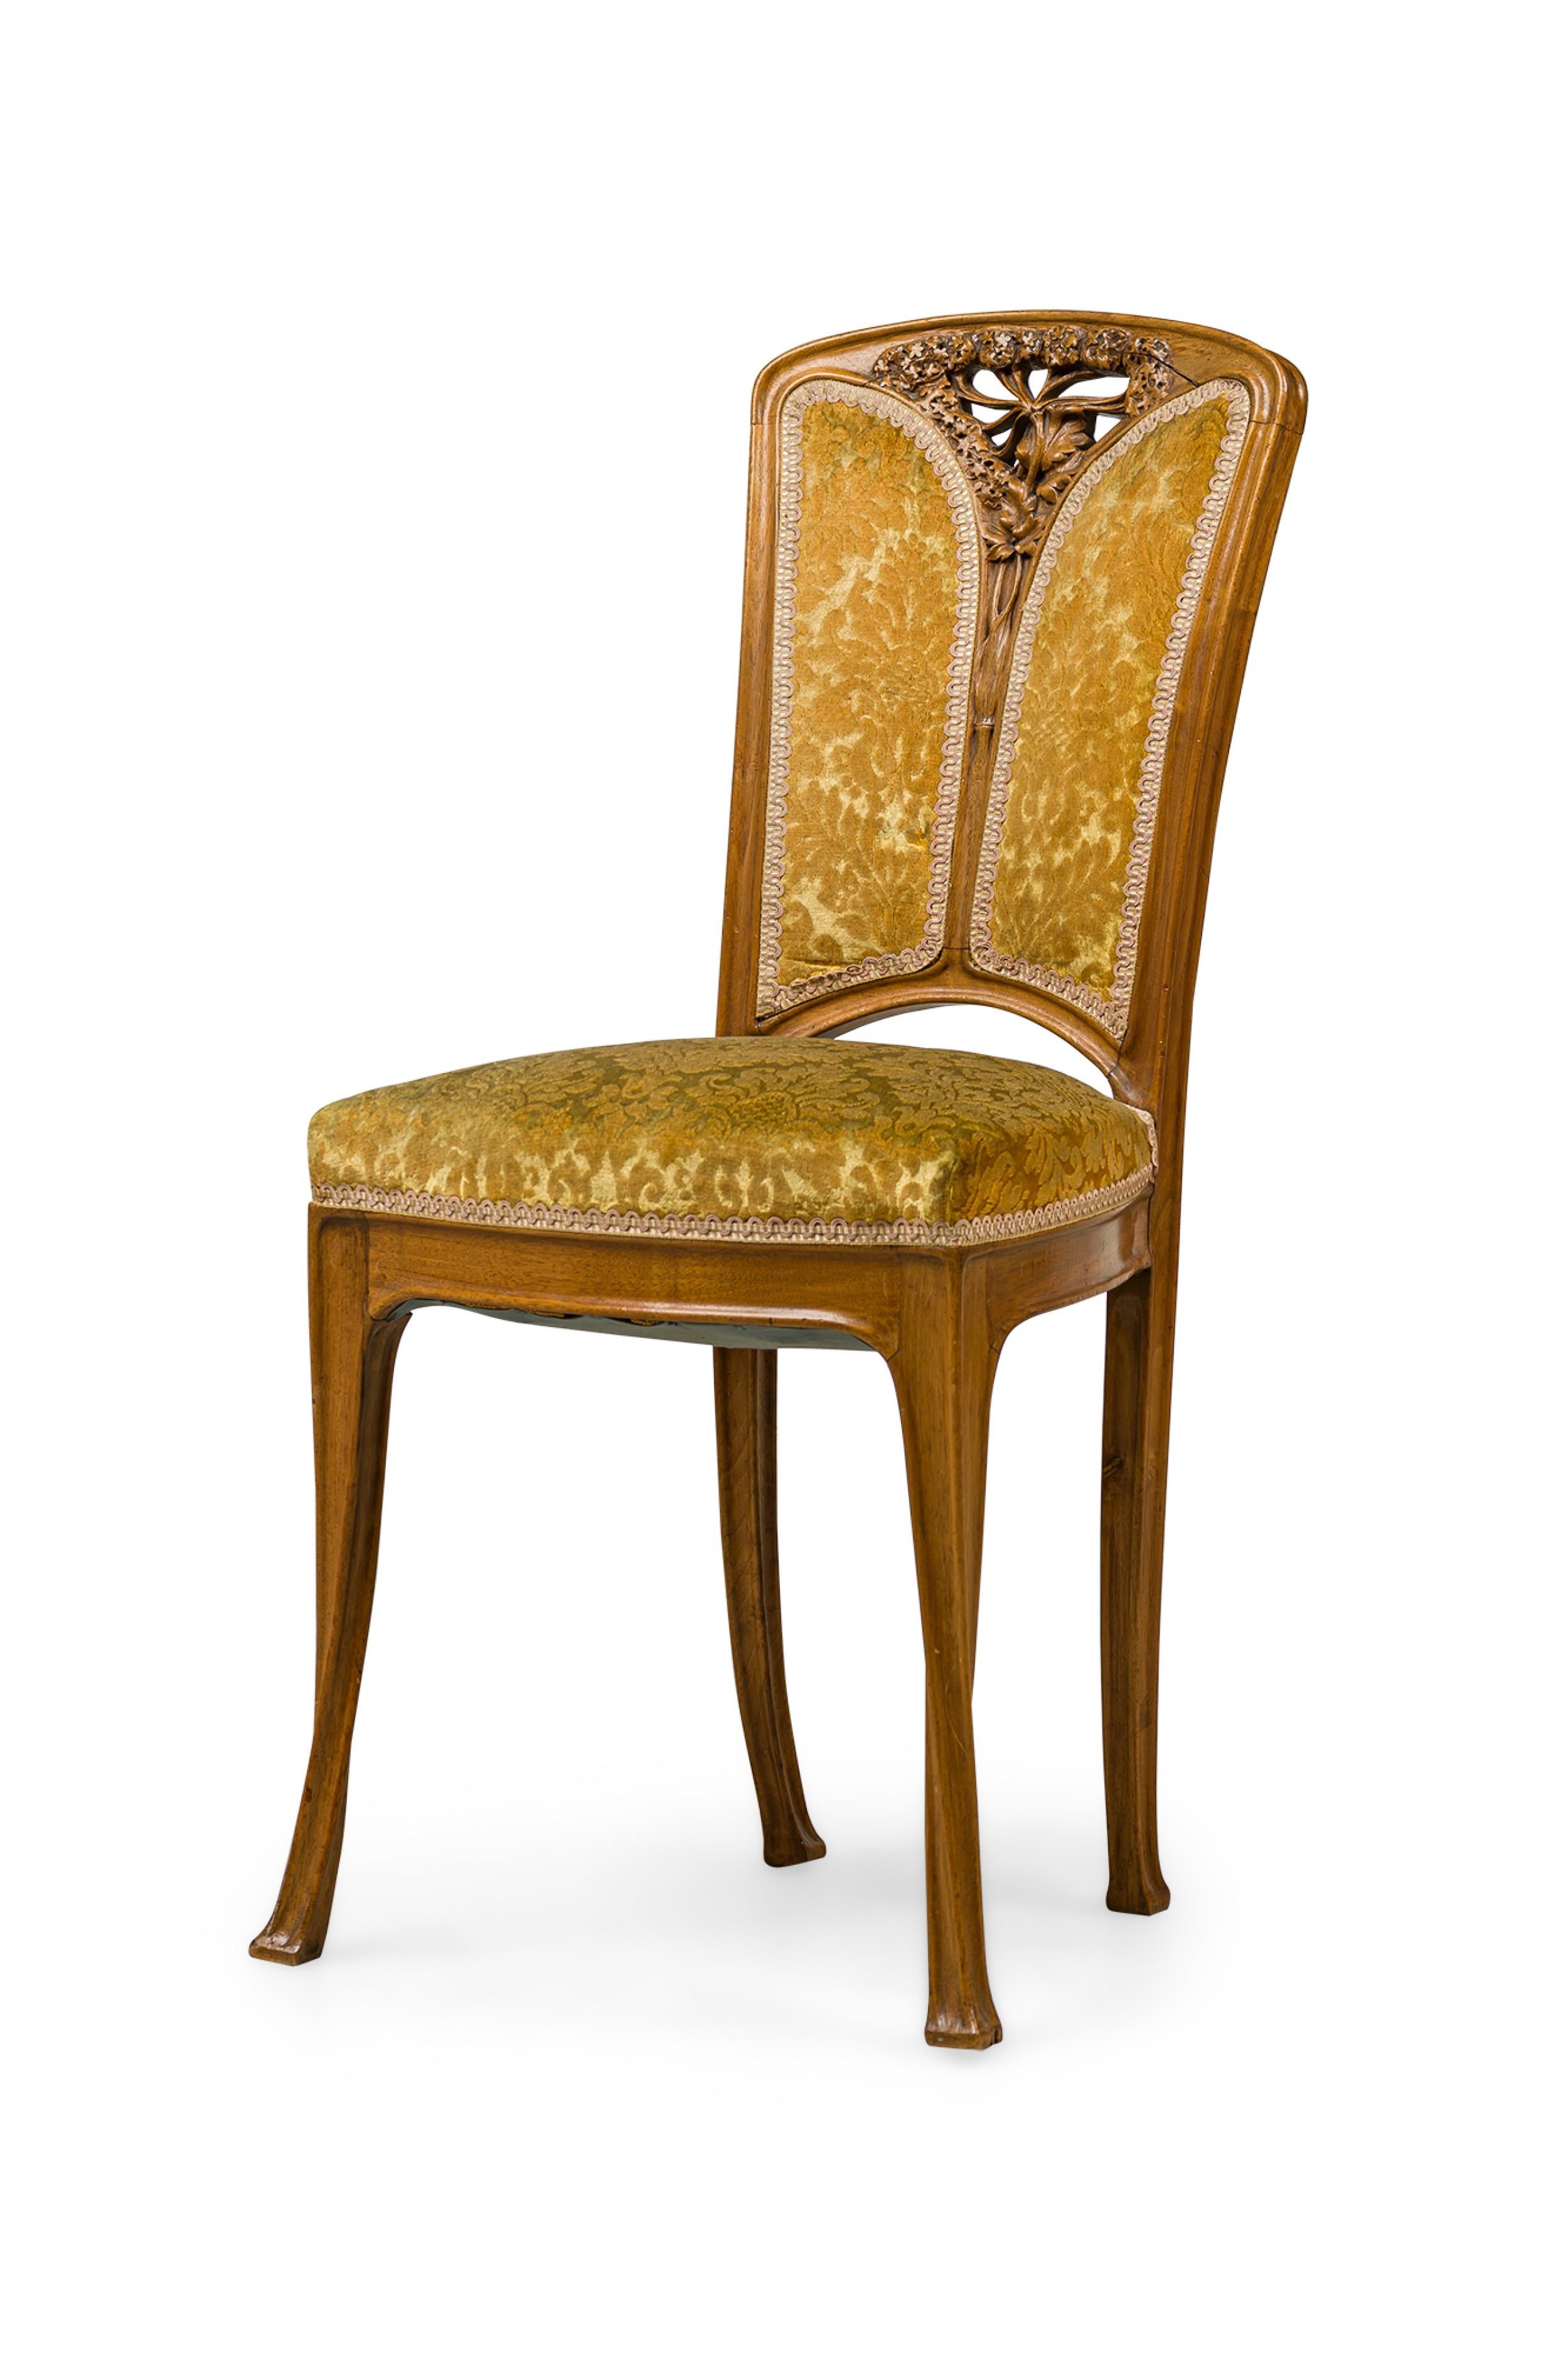 Set of 6 Camille Gauthier French Art Nouveau Ombelle Foliate Carved Side Chairs In Good Condition For Sale In New York, NY